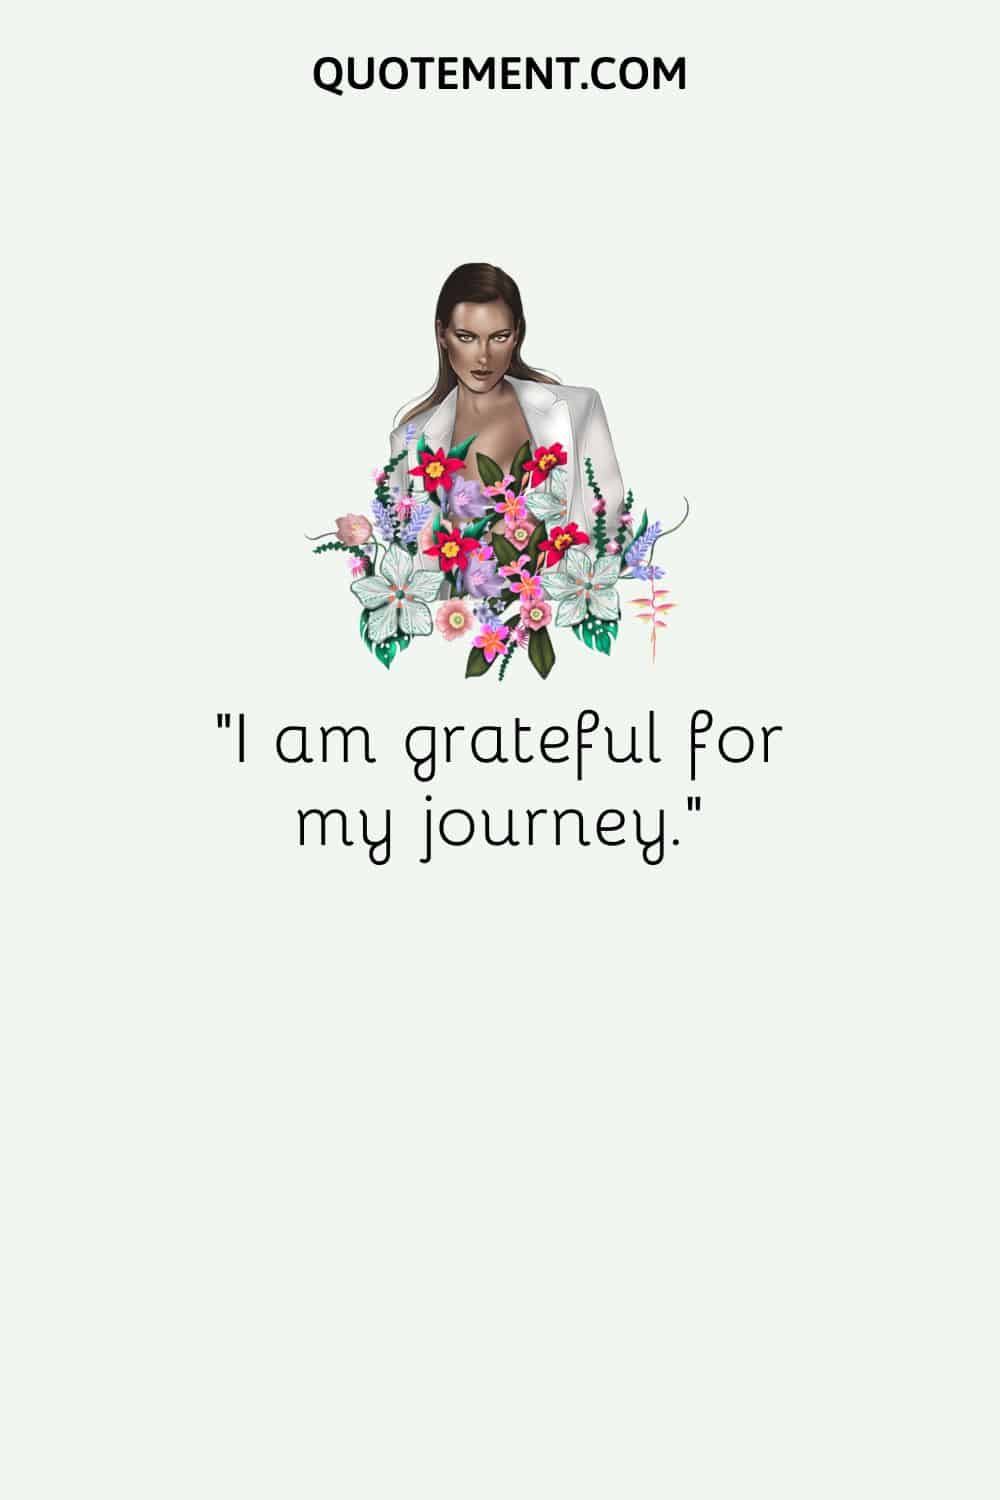 “I am grateful for my journey.“